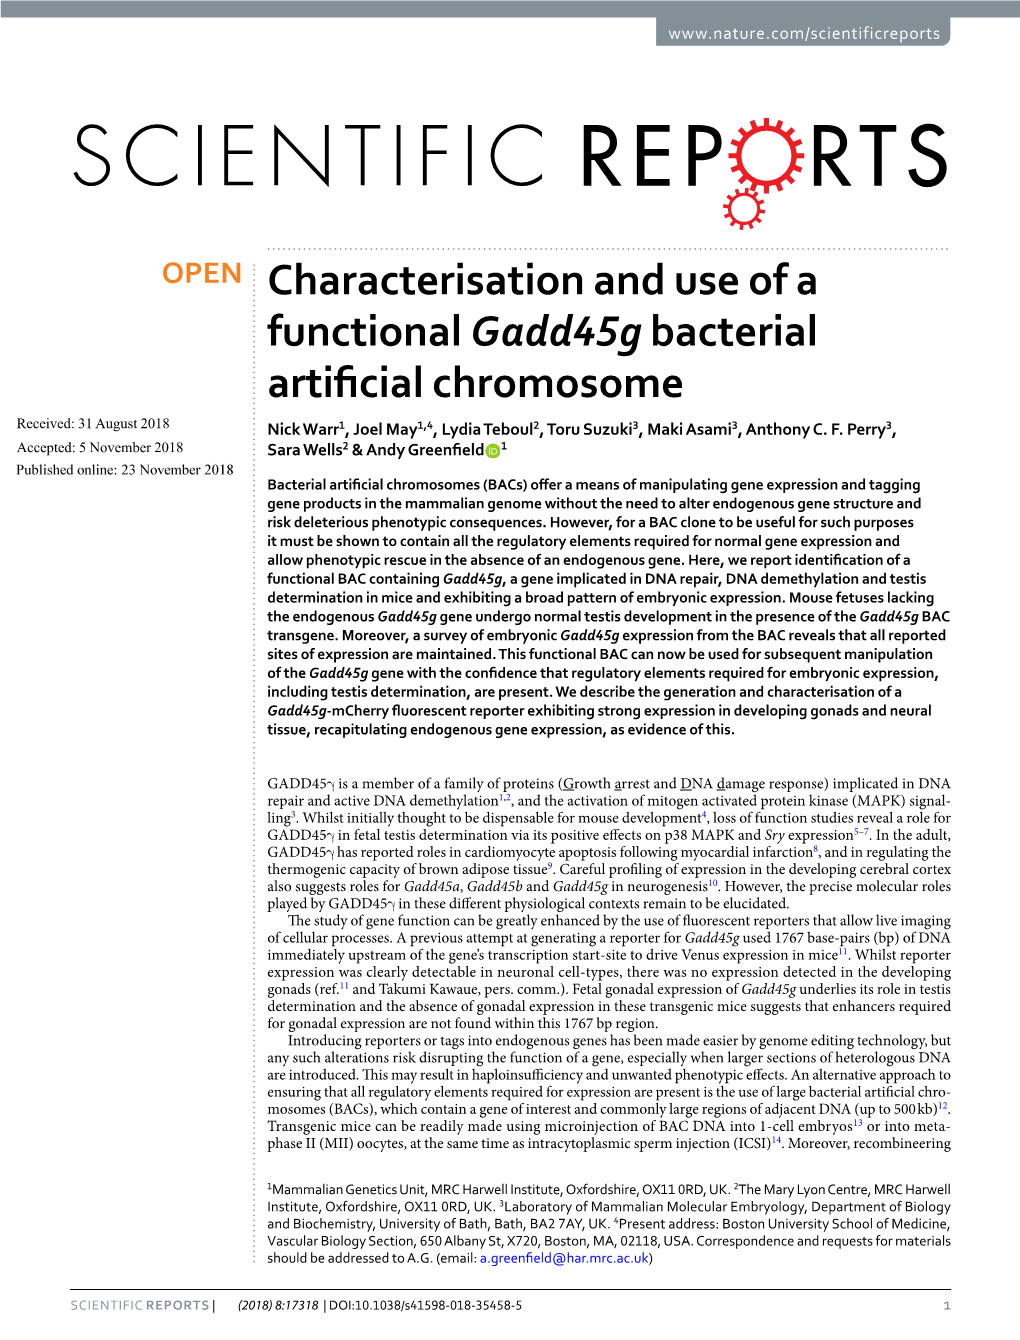 Characterisation and Use of a Functional Gadd45g Bacterial